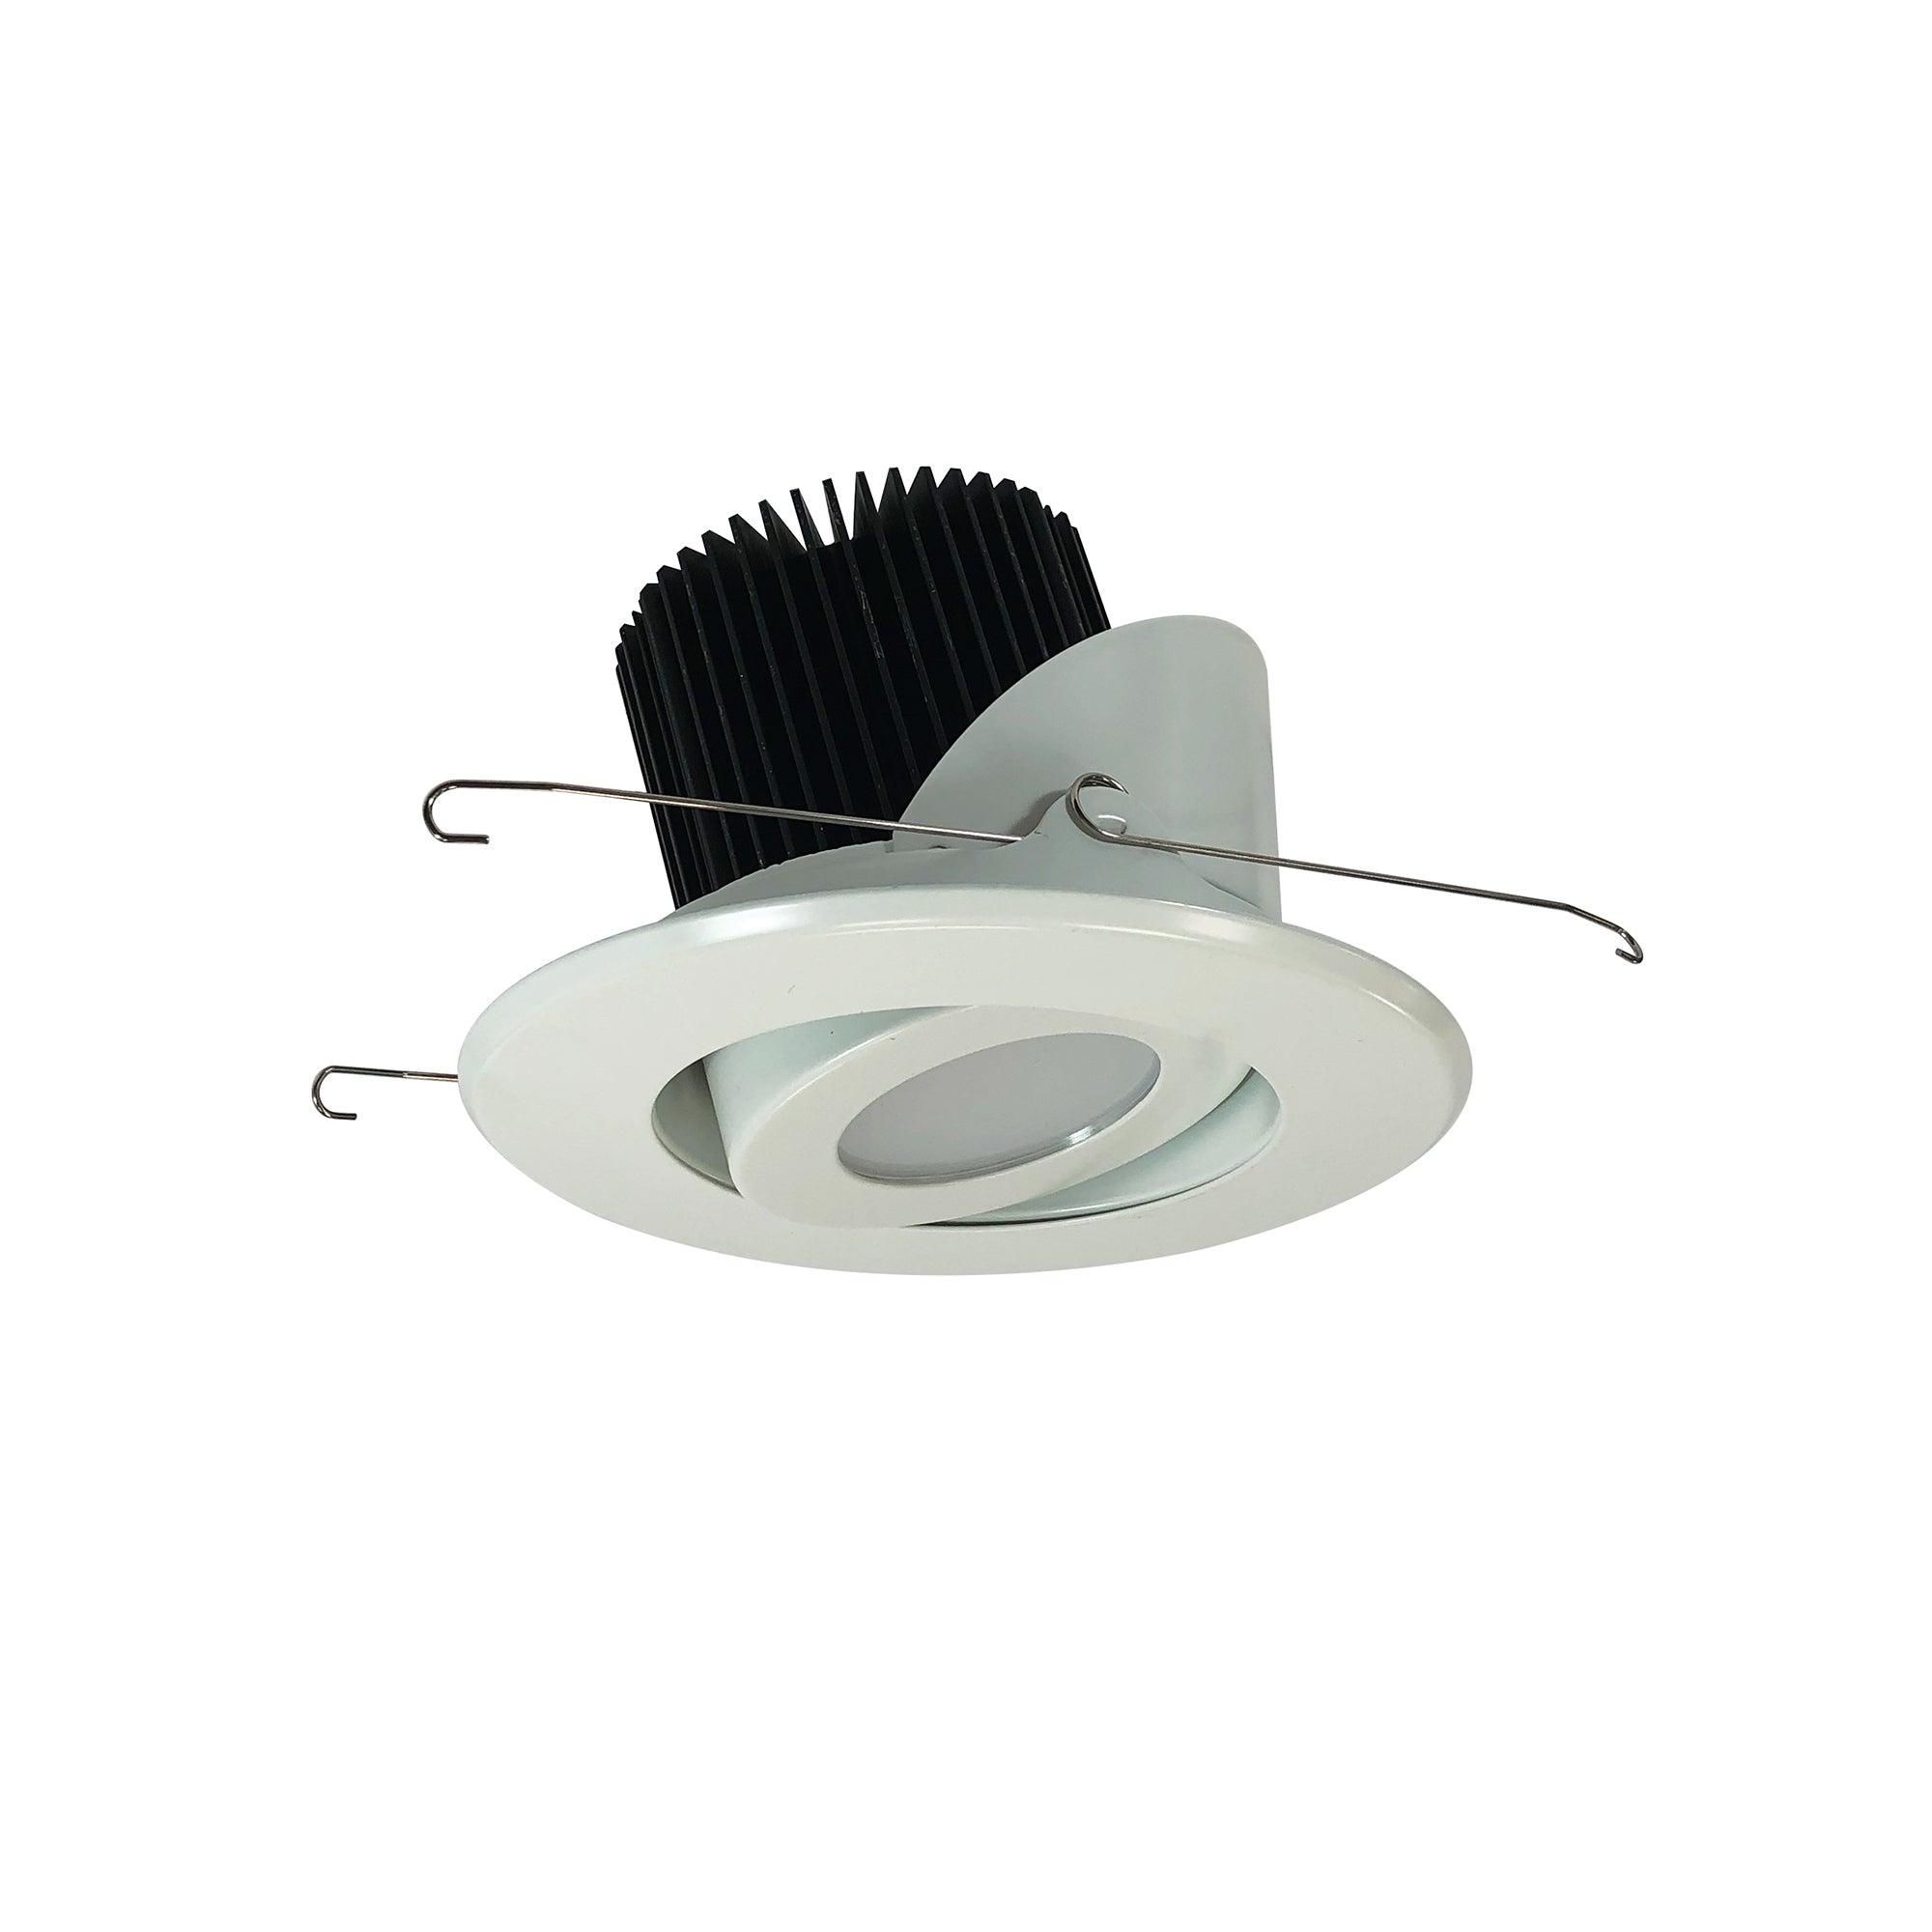 Nora Lighting LE70 - NRM2-514L2535MWW - Recessed - White